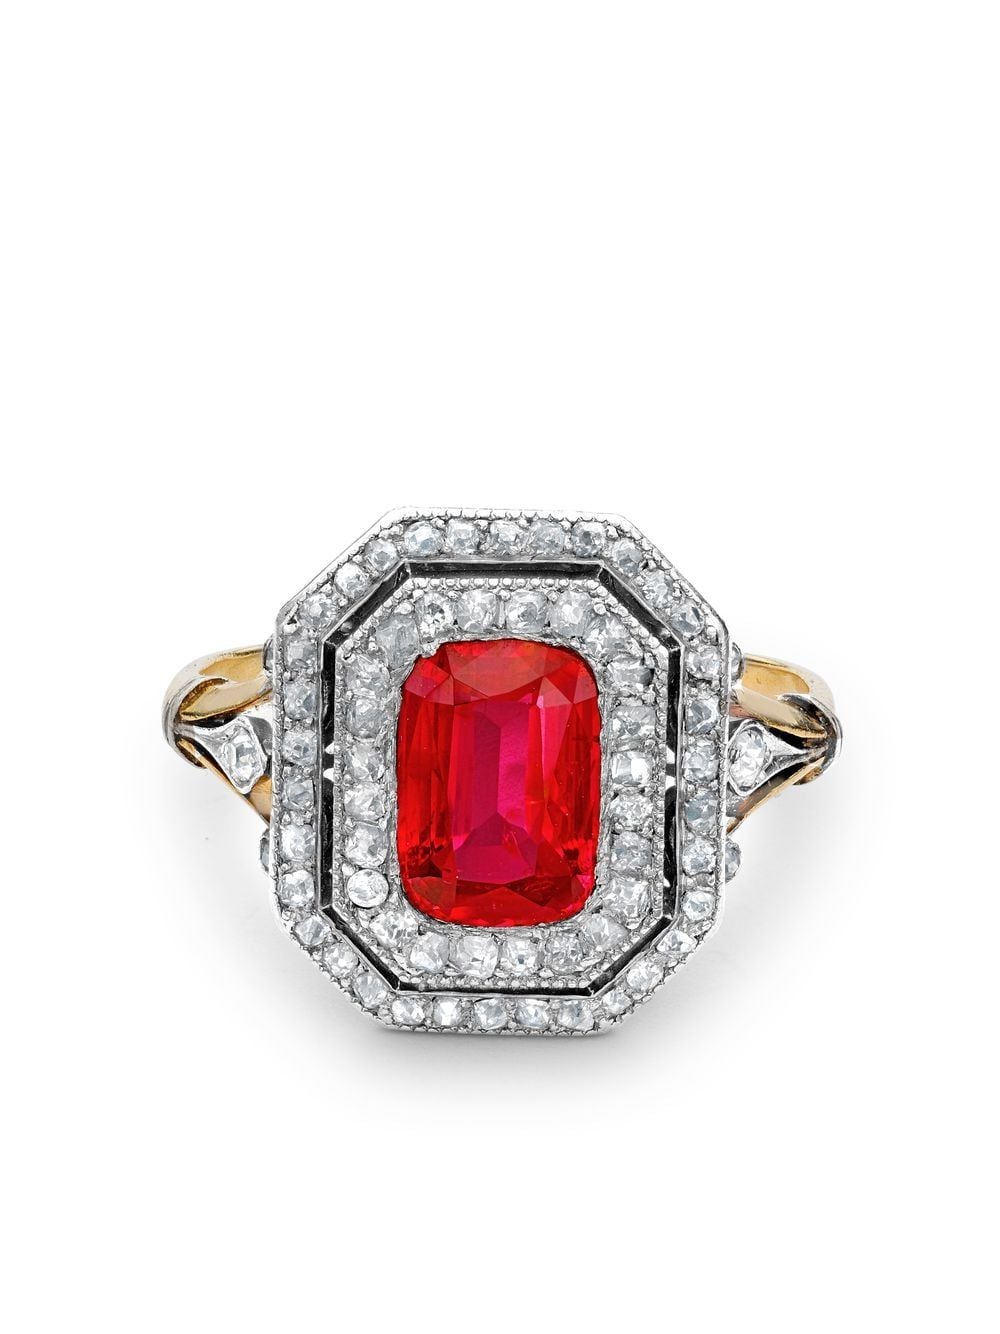 Edwardian 18kt yellow gold and platinum ruby and diamond ring